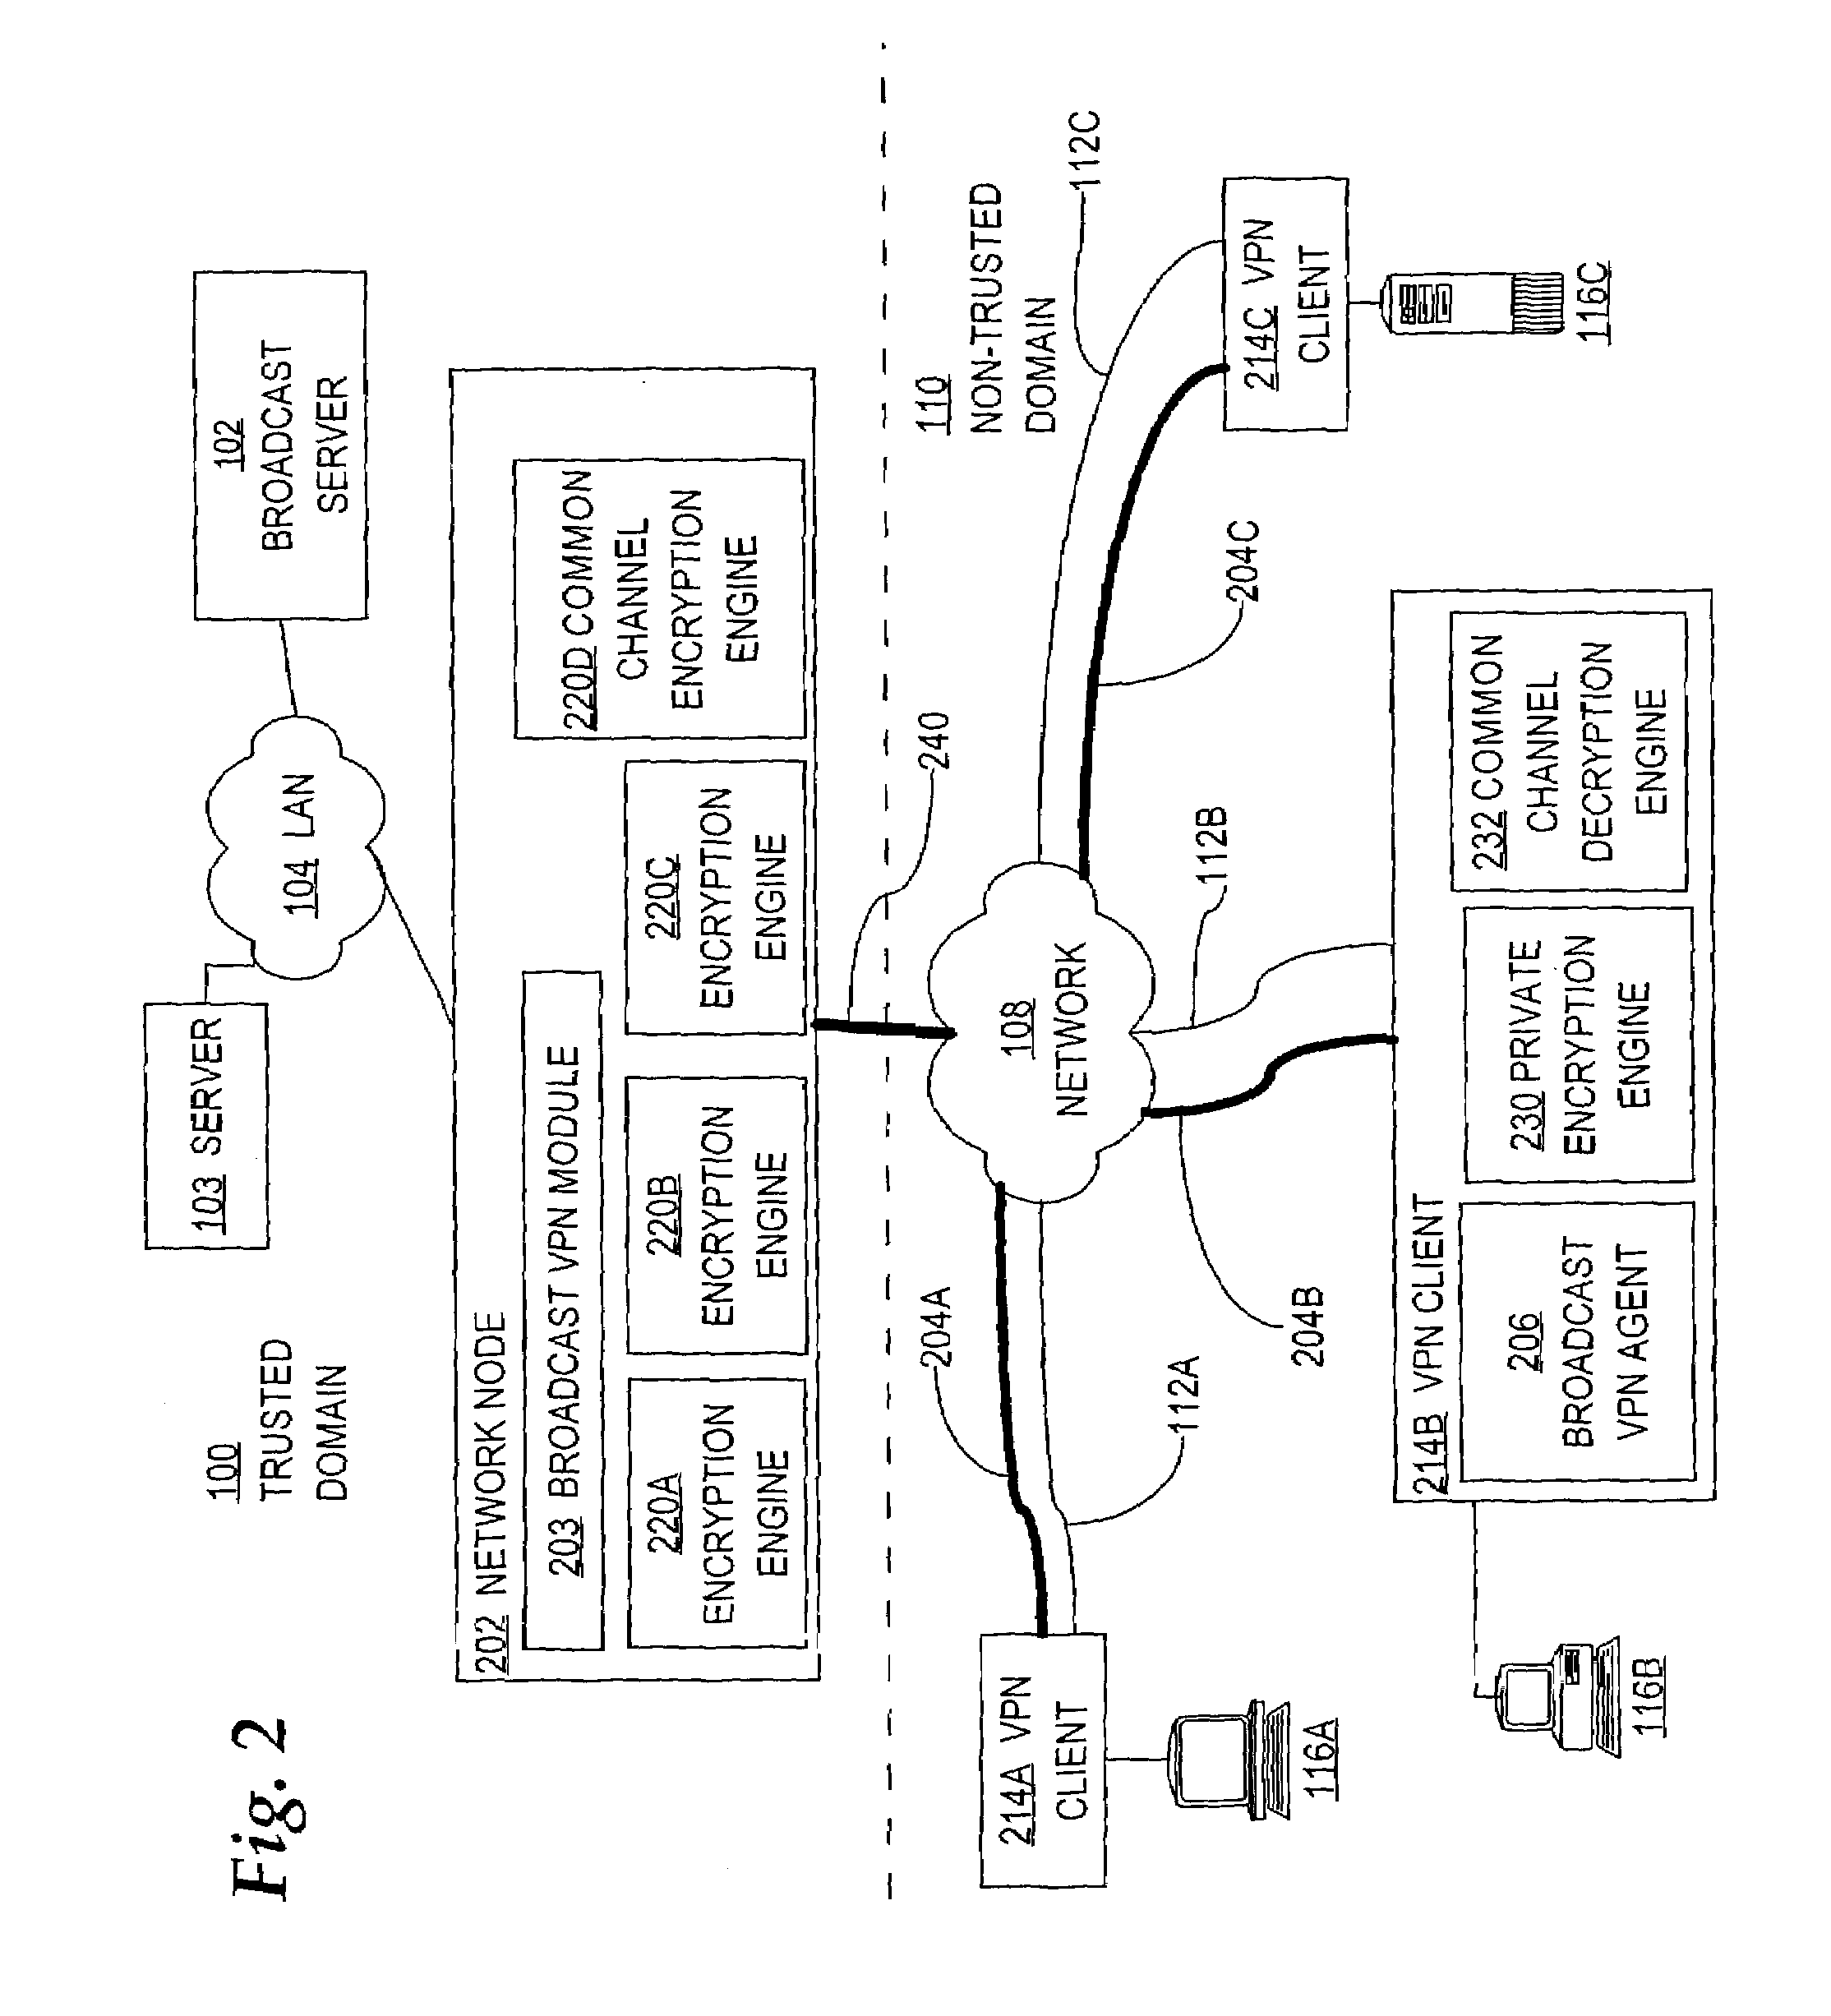 Method and apparatus for communicating an encrypted broadcast to virtual private network receivers